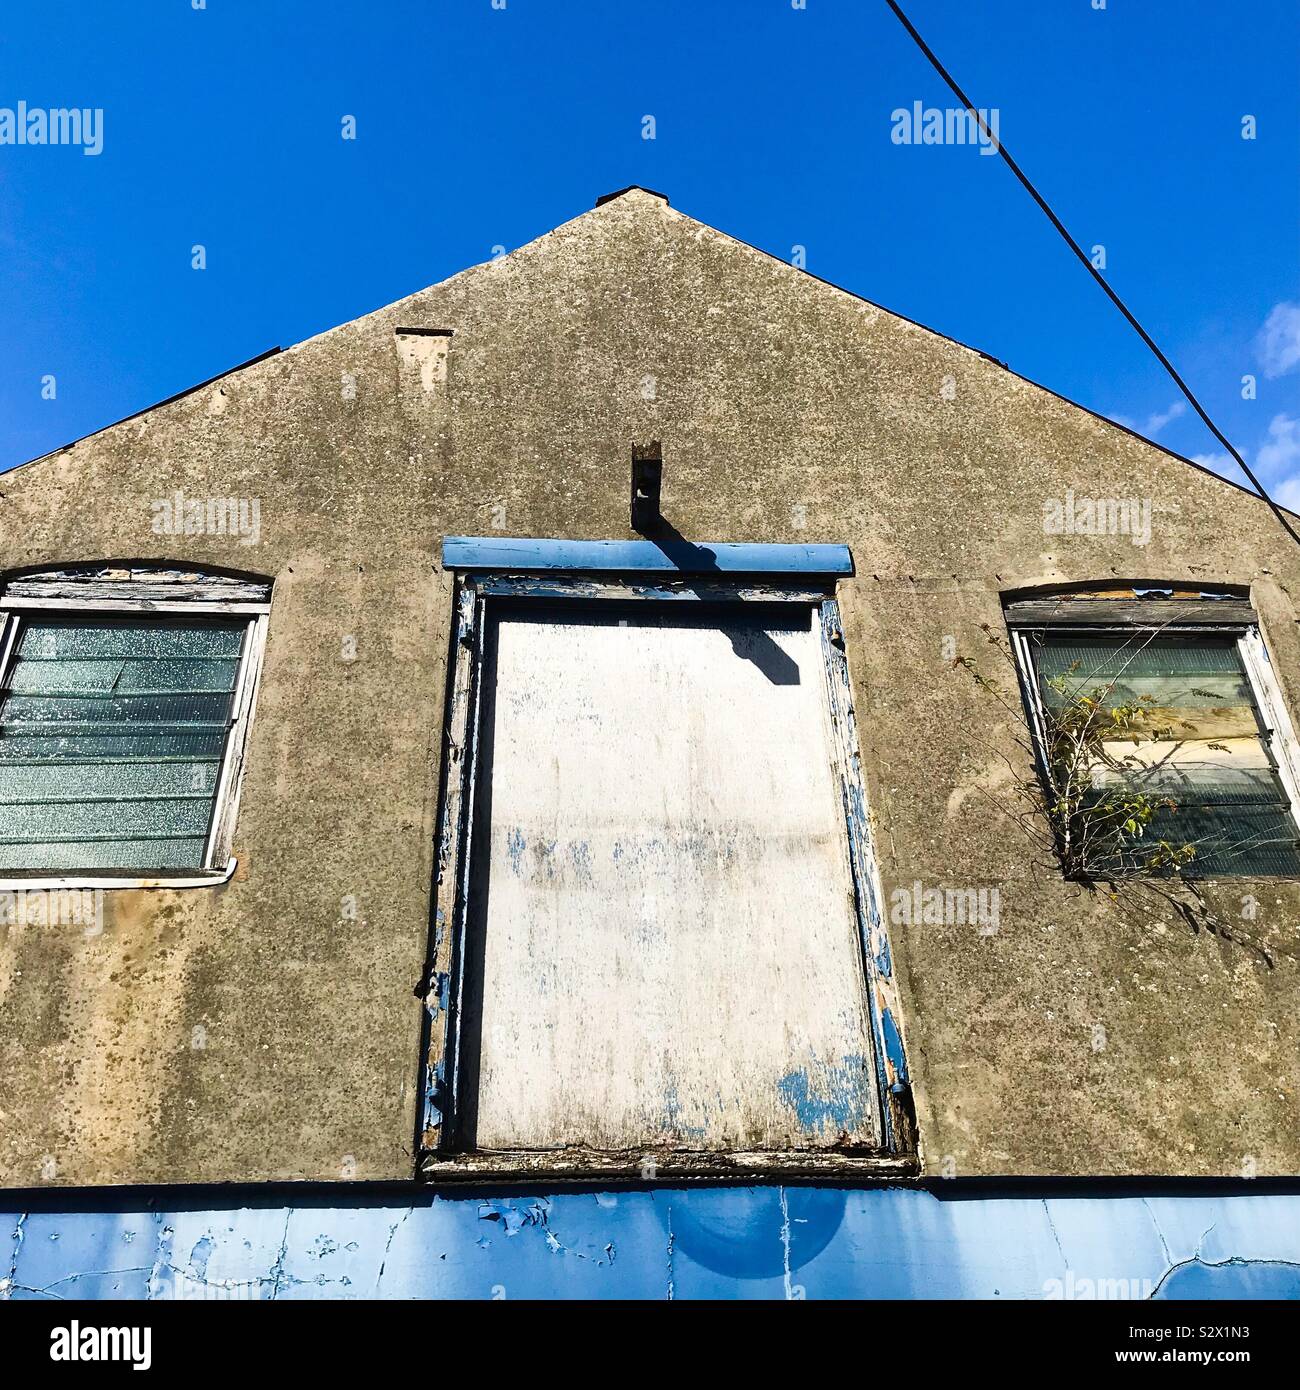 An old disused building gable end Stock Photo